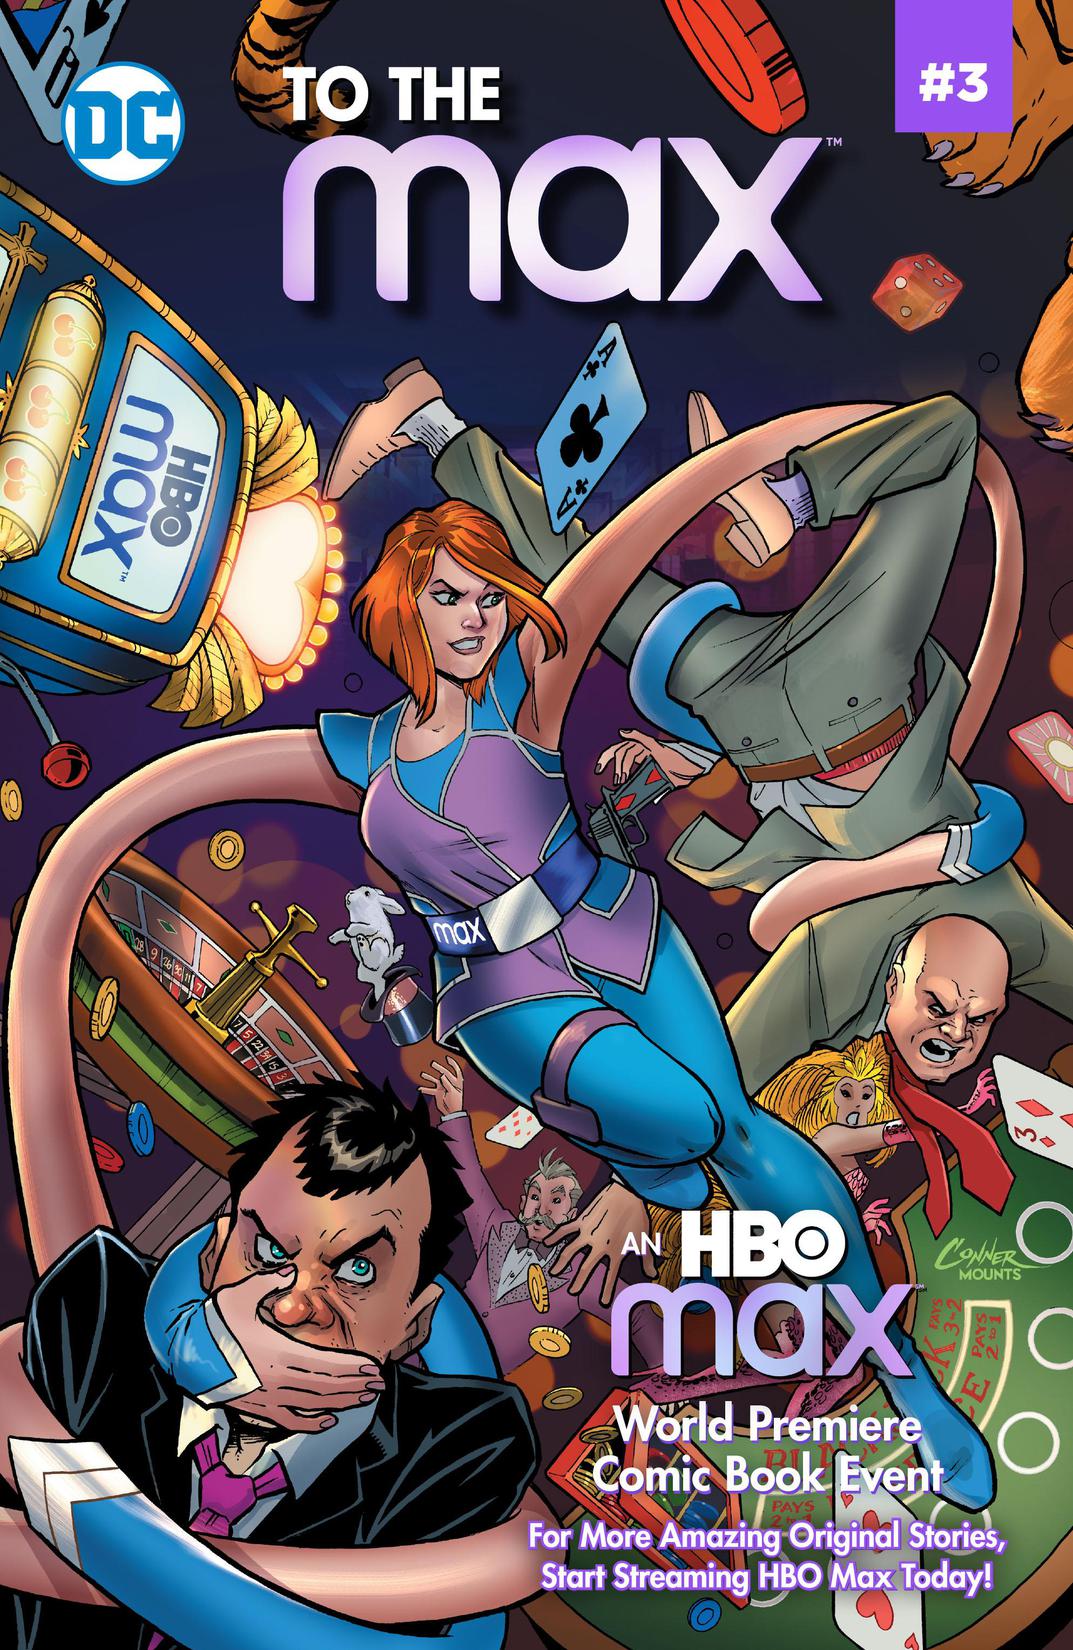 HBO MAX Digital Comic #3 preview images